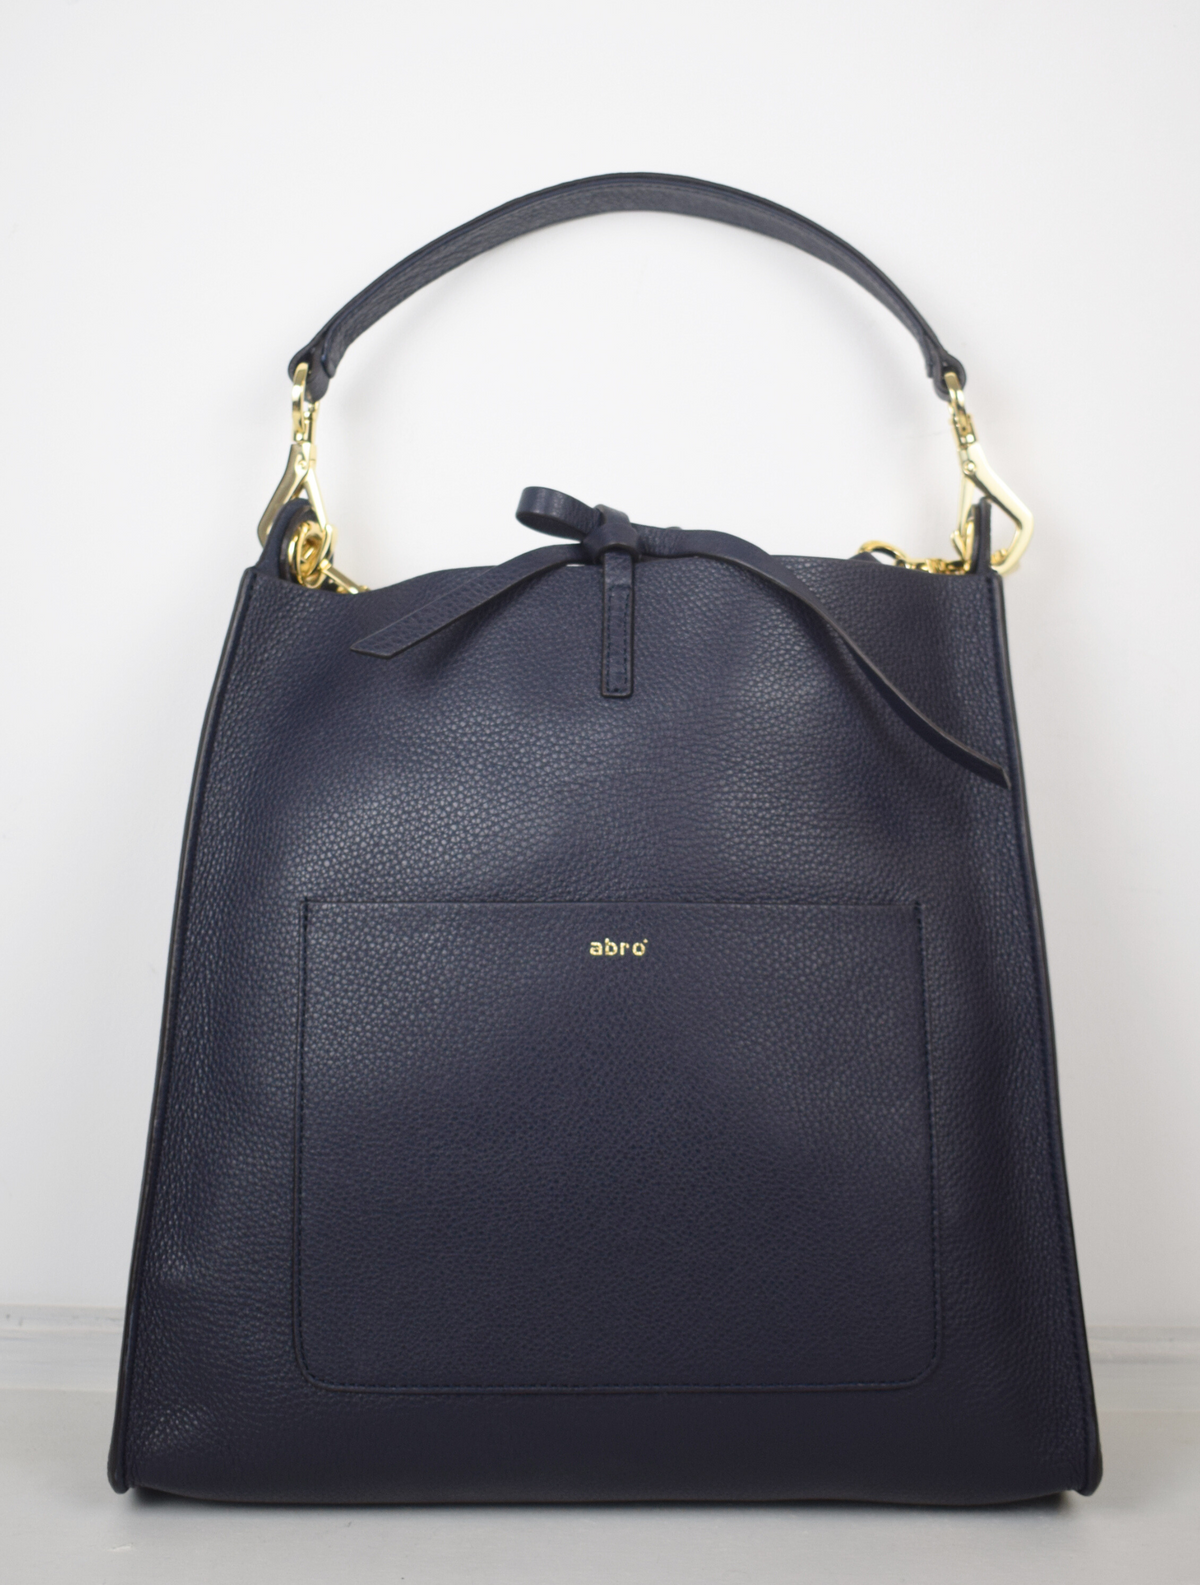 navy leather bag with cross body strap and small handle.